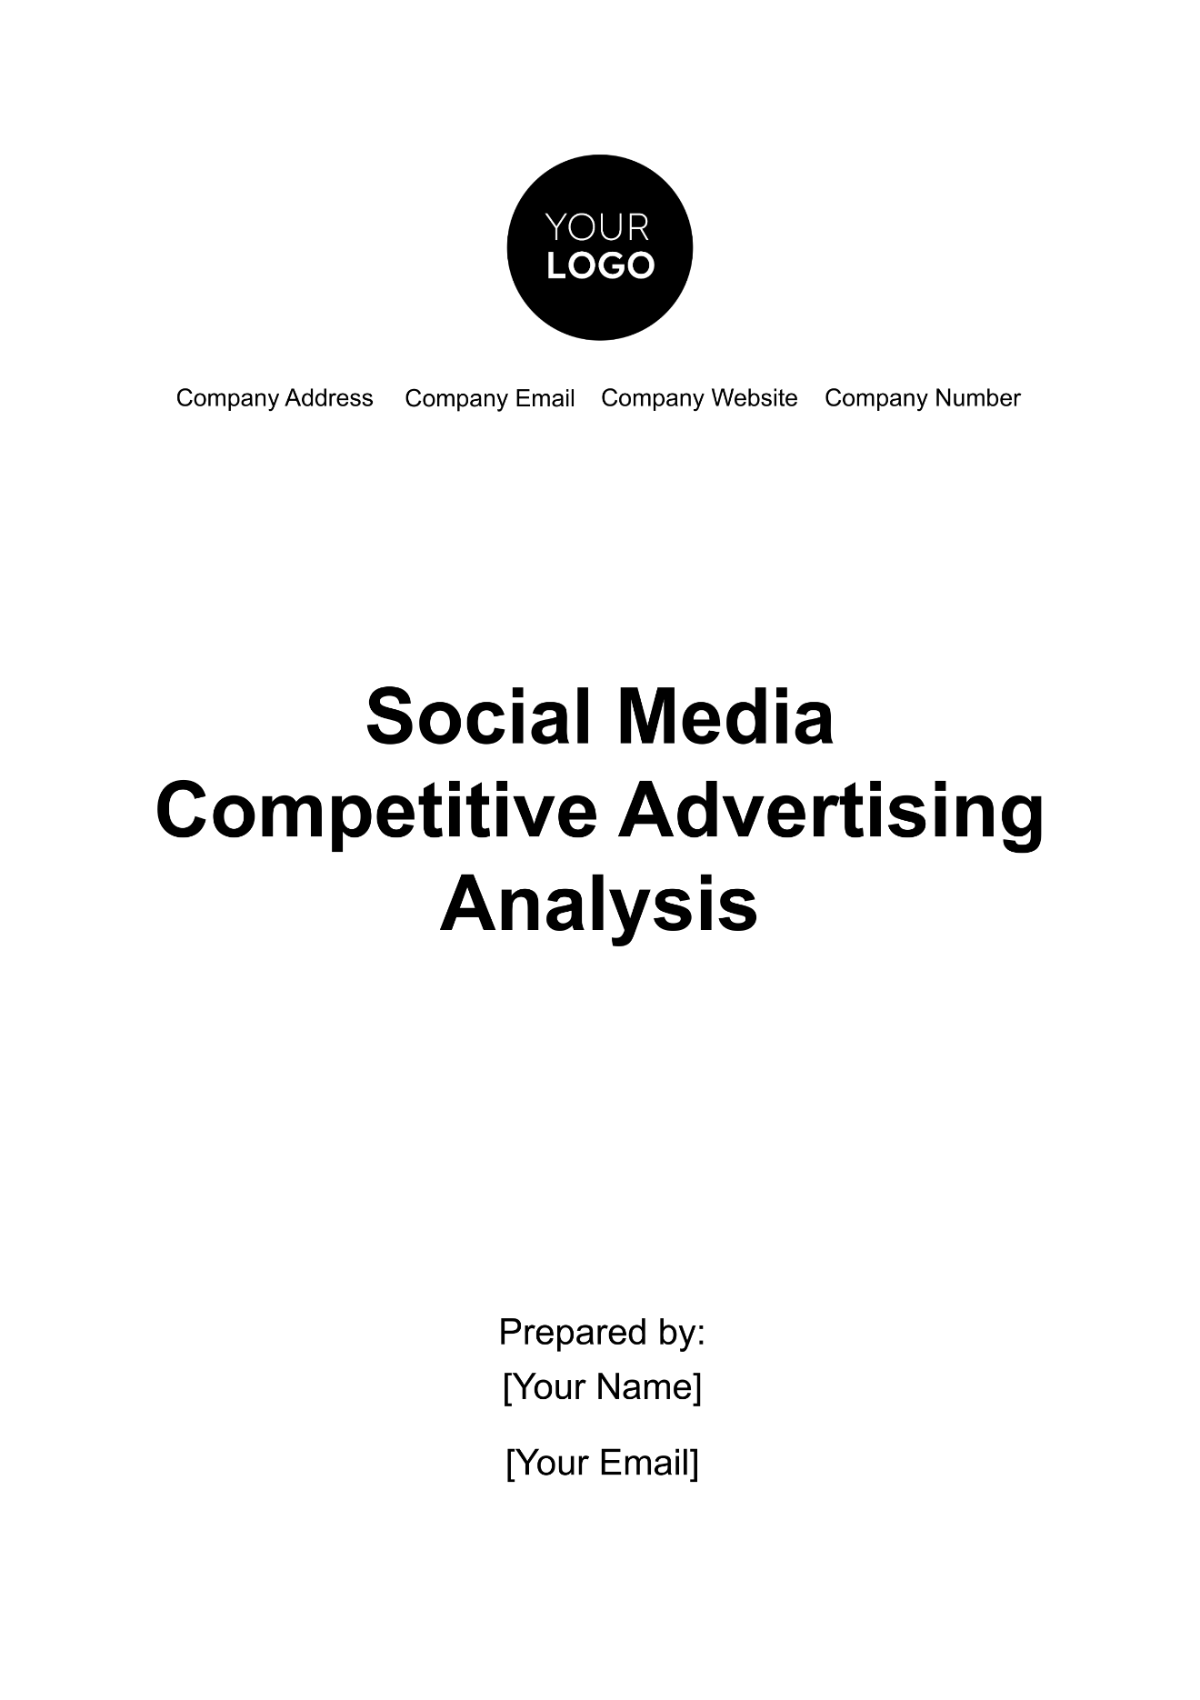 Social Media Competitive Advertising Analysis Template